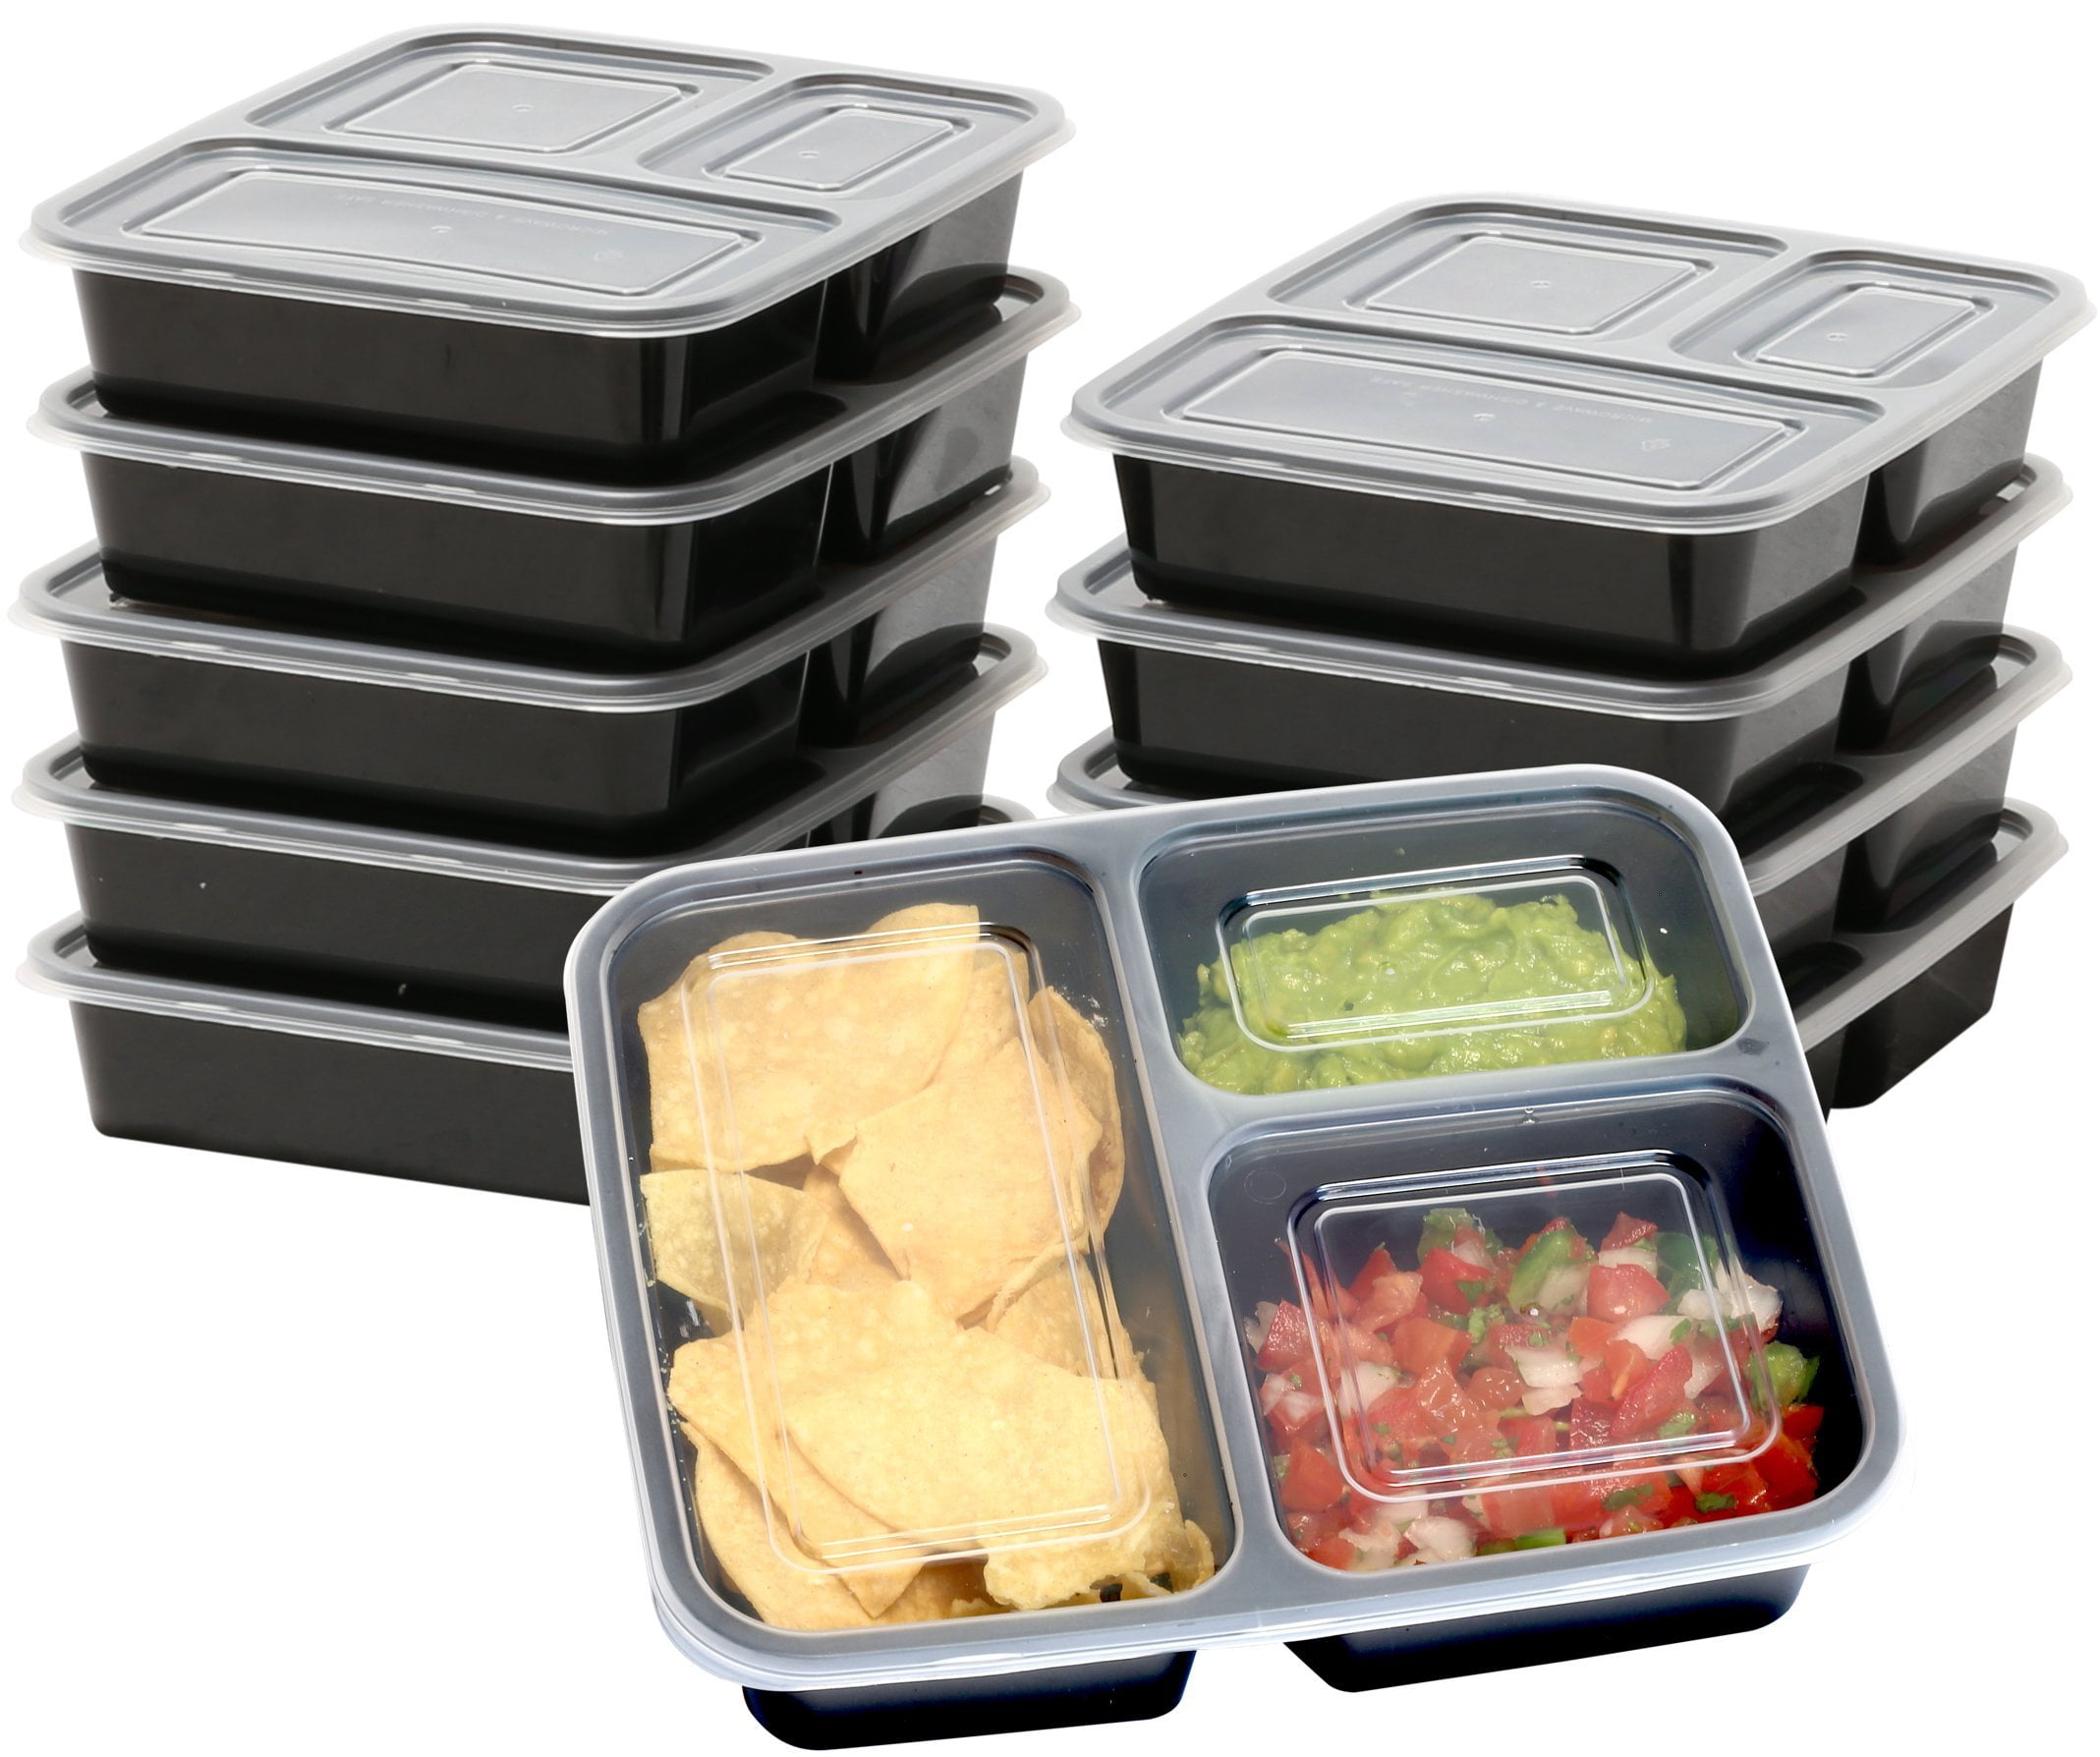 PrepNaturals 8 Pack Glass Food Storage Containers with Lids - Leakproof  Glass Meal Prep Containers - Bento Box for Lunch - Dishwasher, Microwave,  Oven & Freezer Safe (Multi-Compartment): Home & Kitchen 